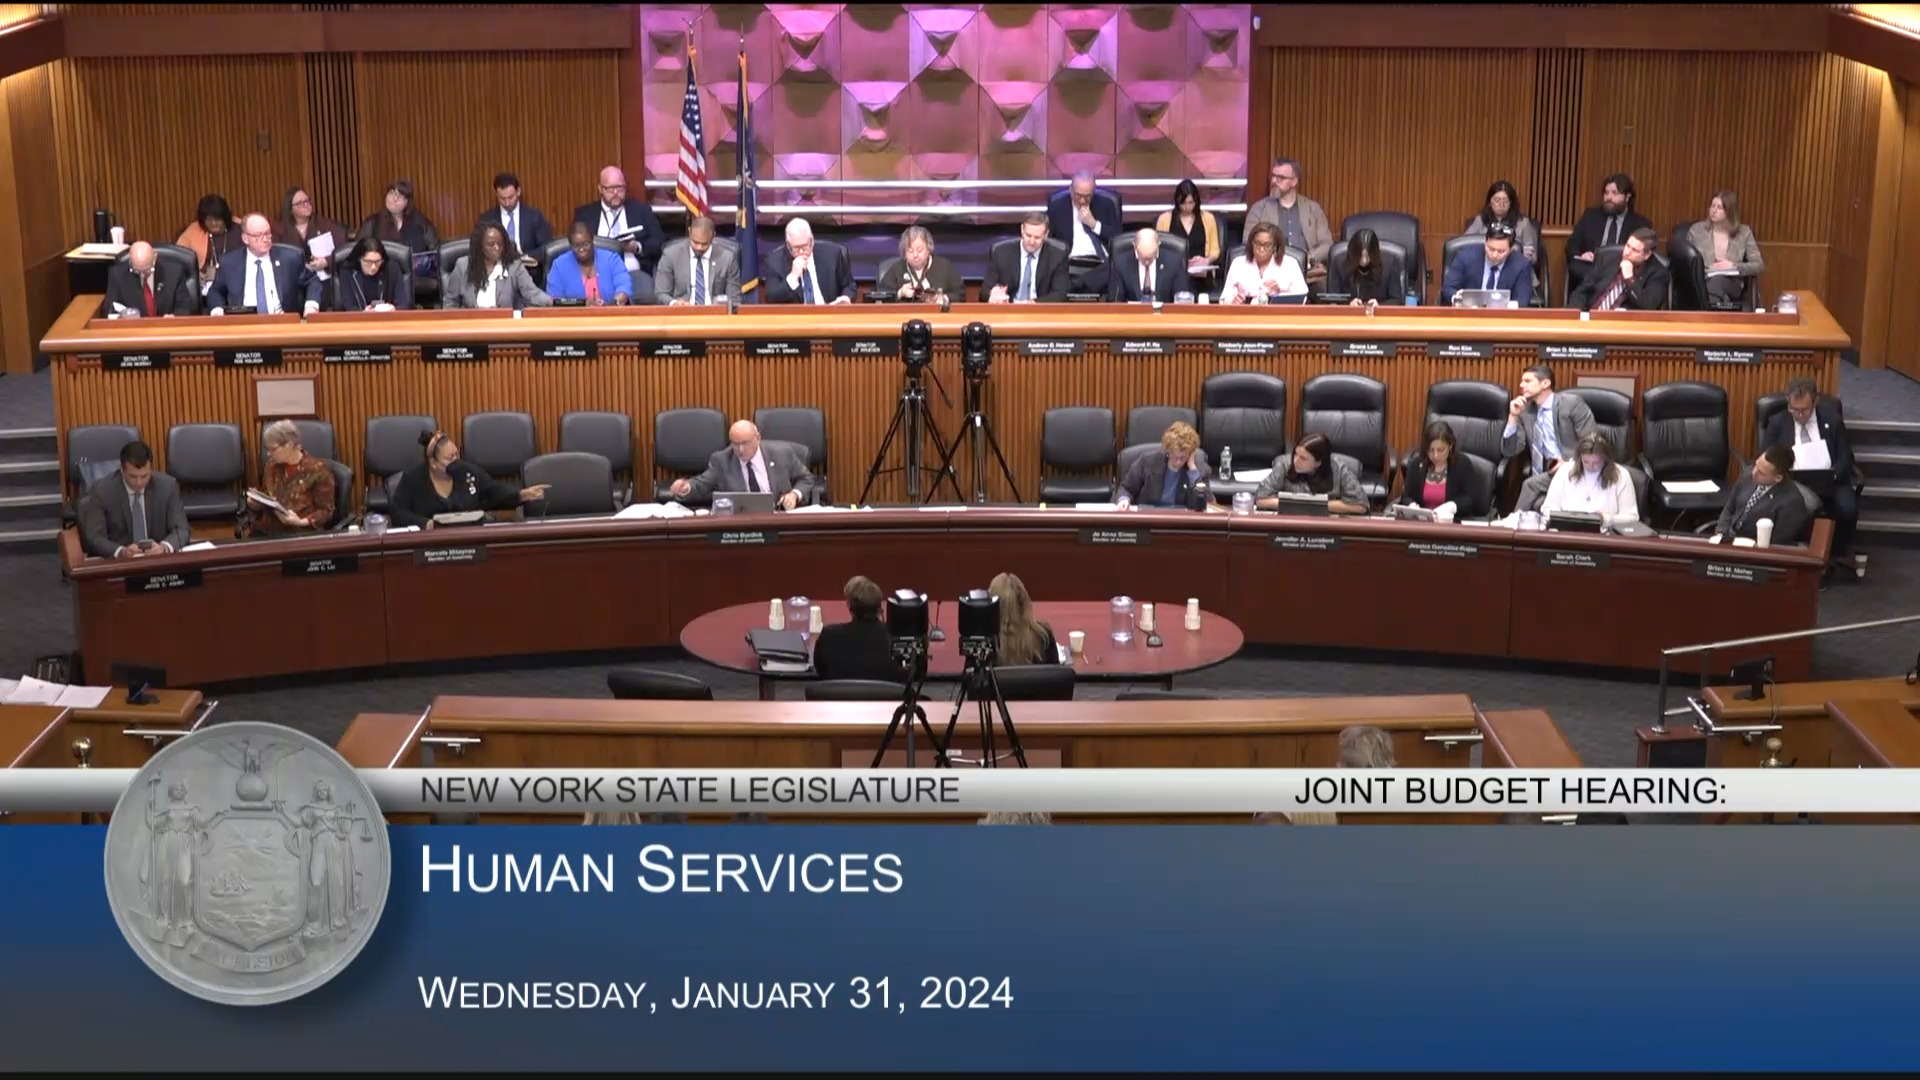 OTDA Commissioner Testifies During Budget Hearing on Human Services